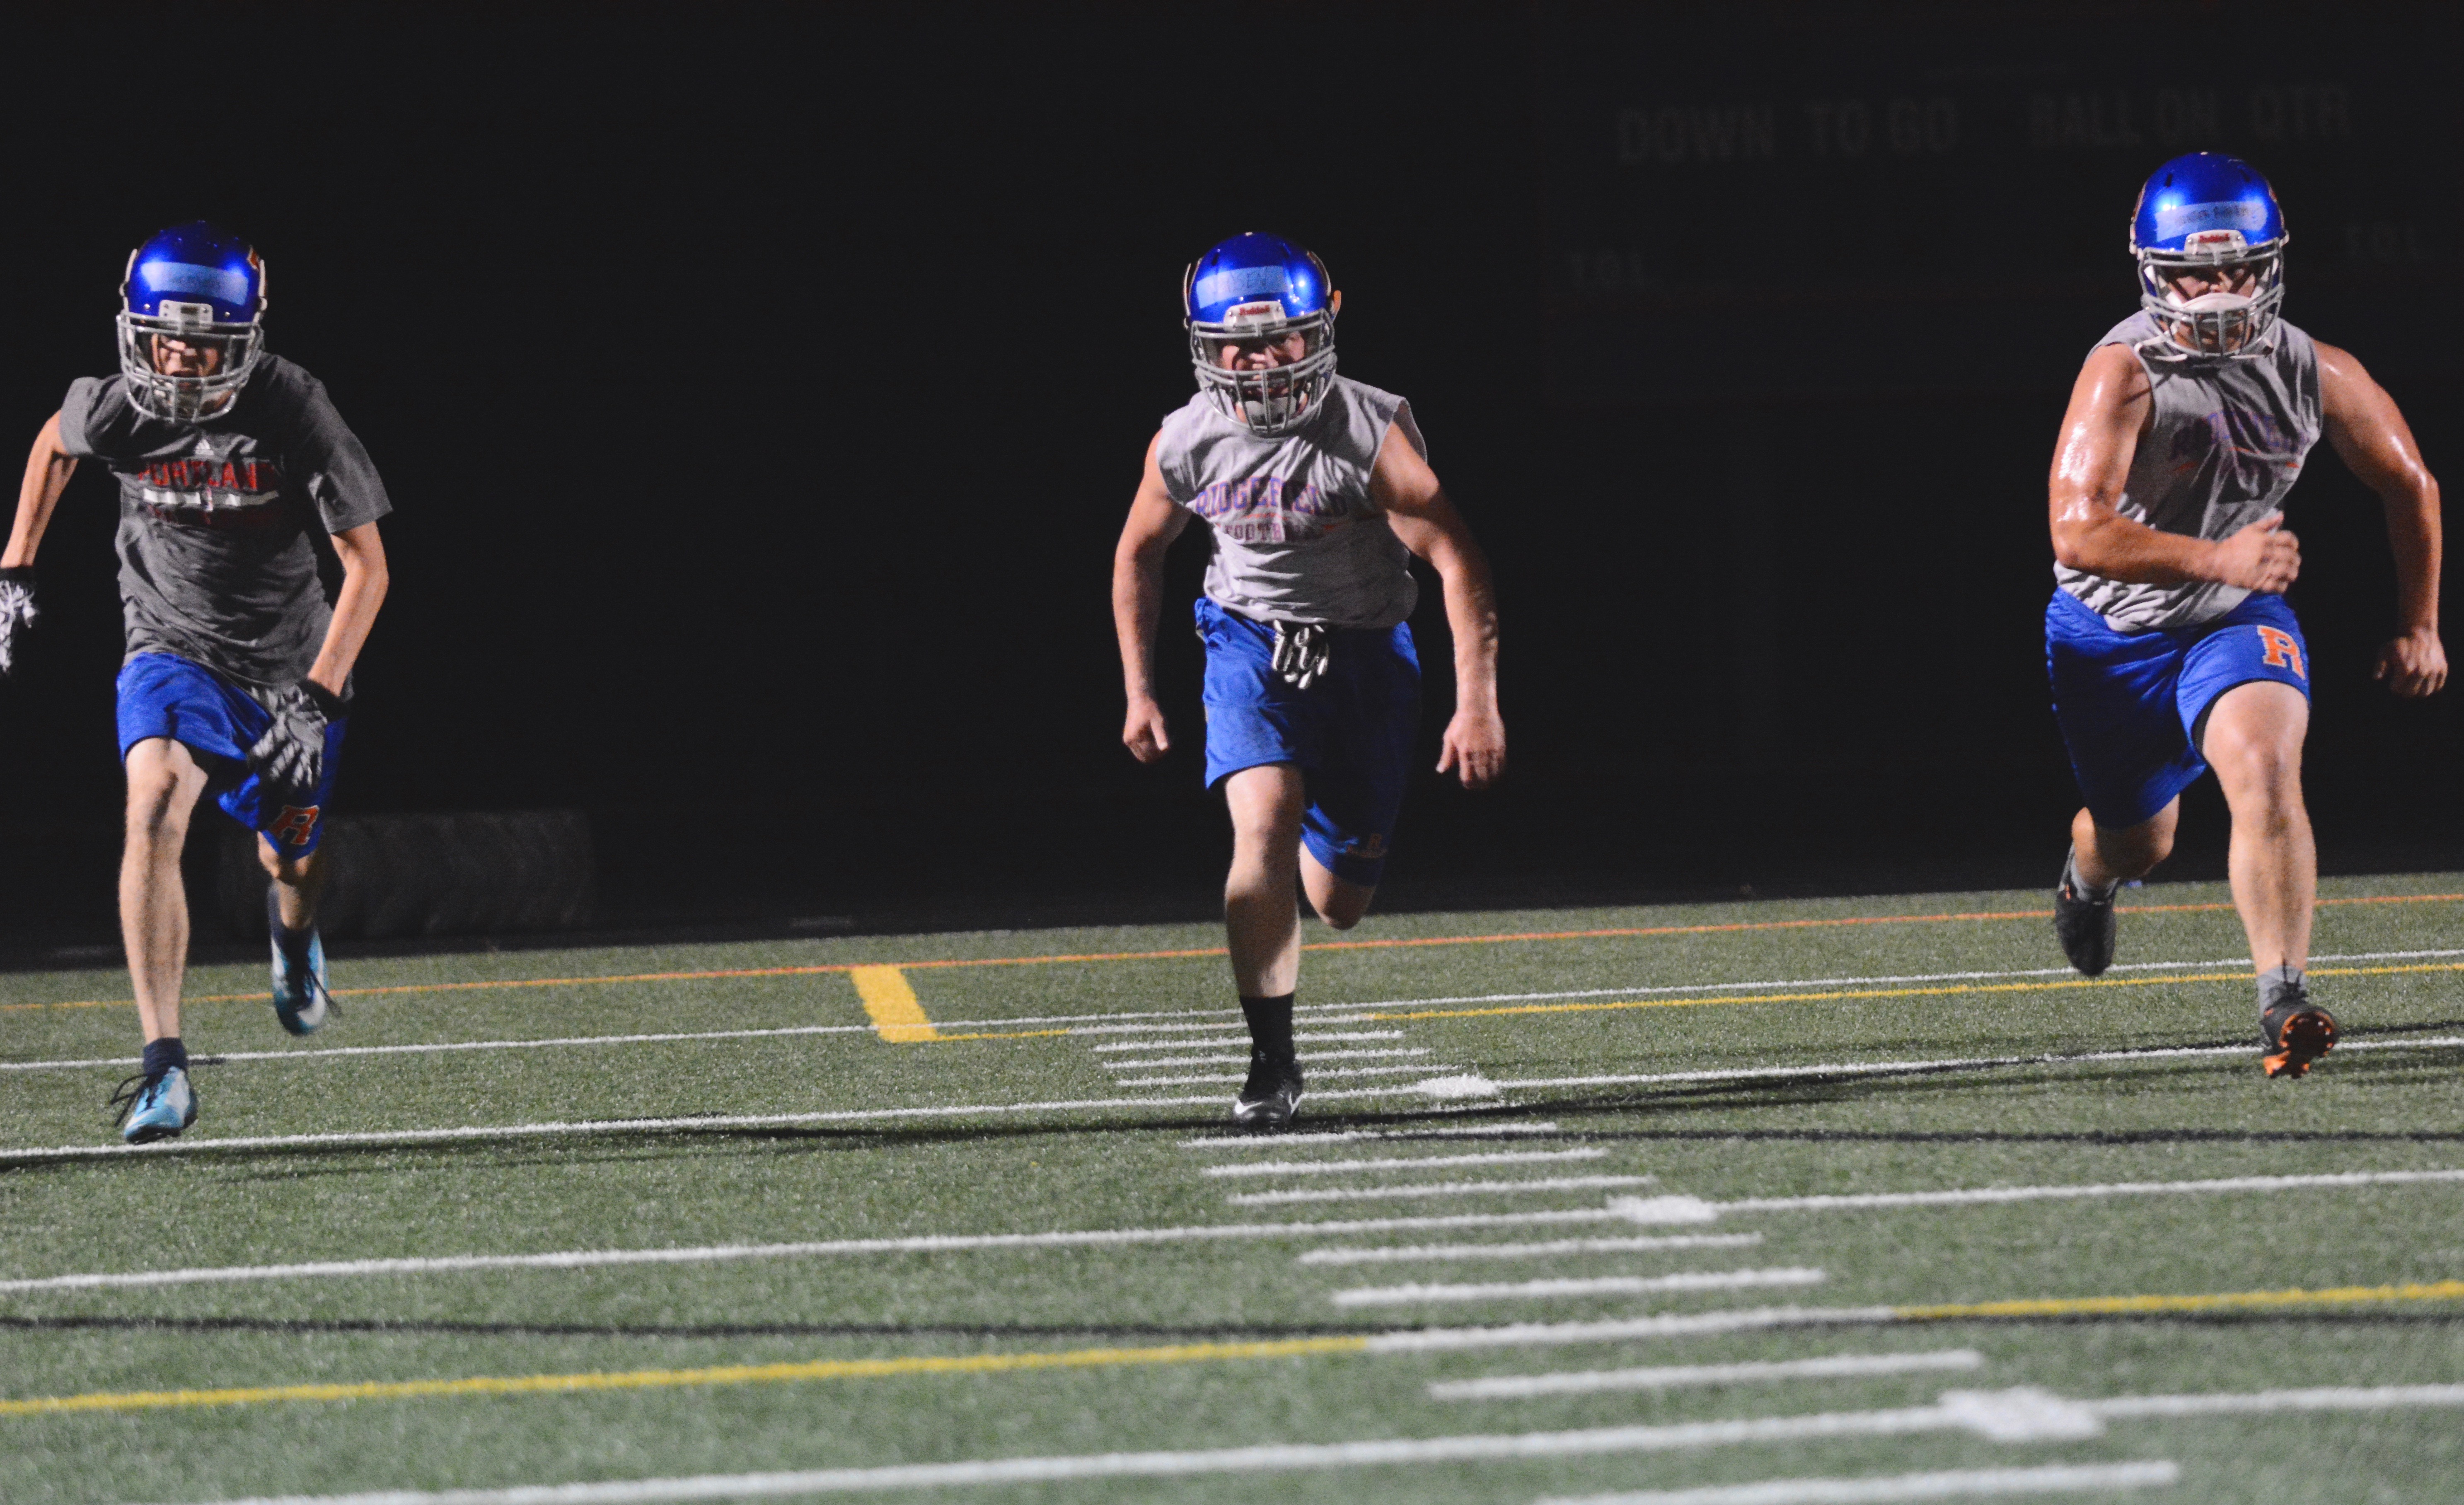 Ridgefield running back Hunter Abrams sprints during a trunnings drill at the first practice of the fall — a midnight practice — at Ridgefield High School on Wednesday, Aug. 15, 2018 (Andy Buhler/Columbian Staff).